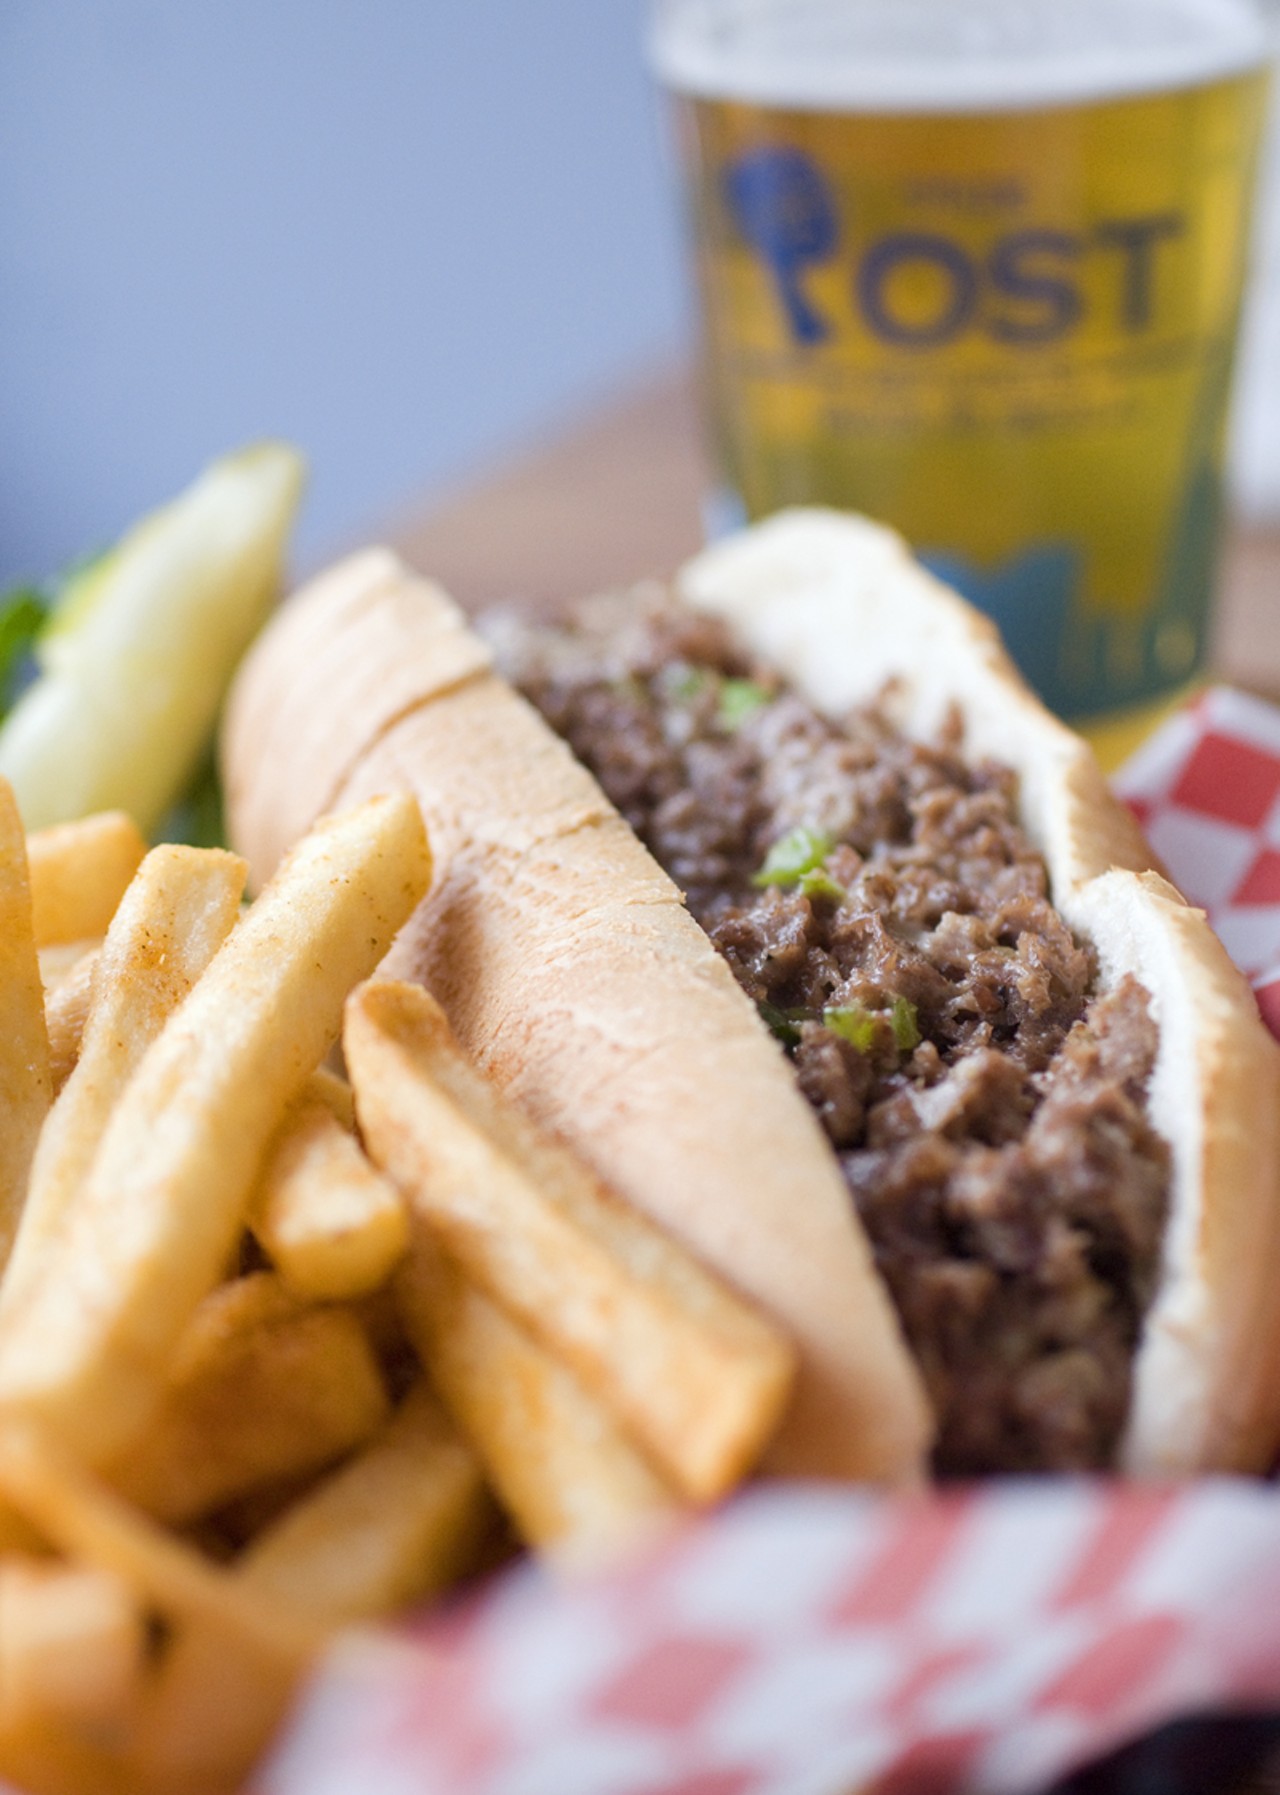 And serve on a toasted hoagie with seasoned fries -- and a nice cold one, if you like. You also have the option of substituting the rib-eye with chicken.